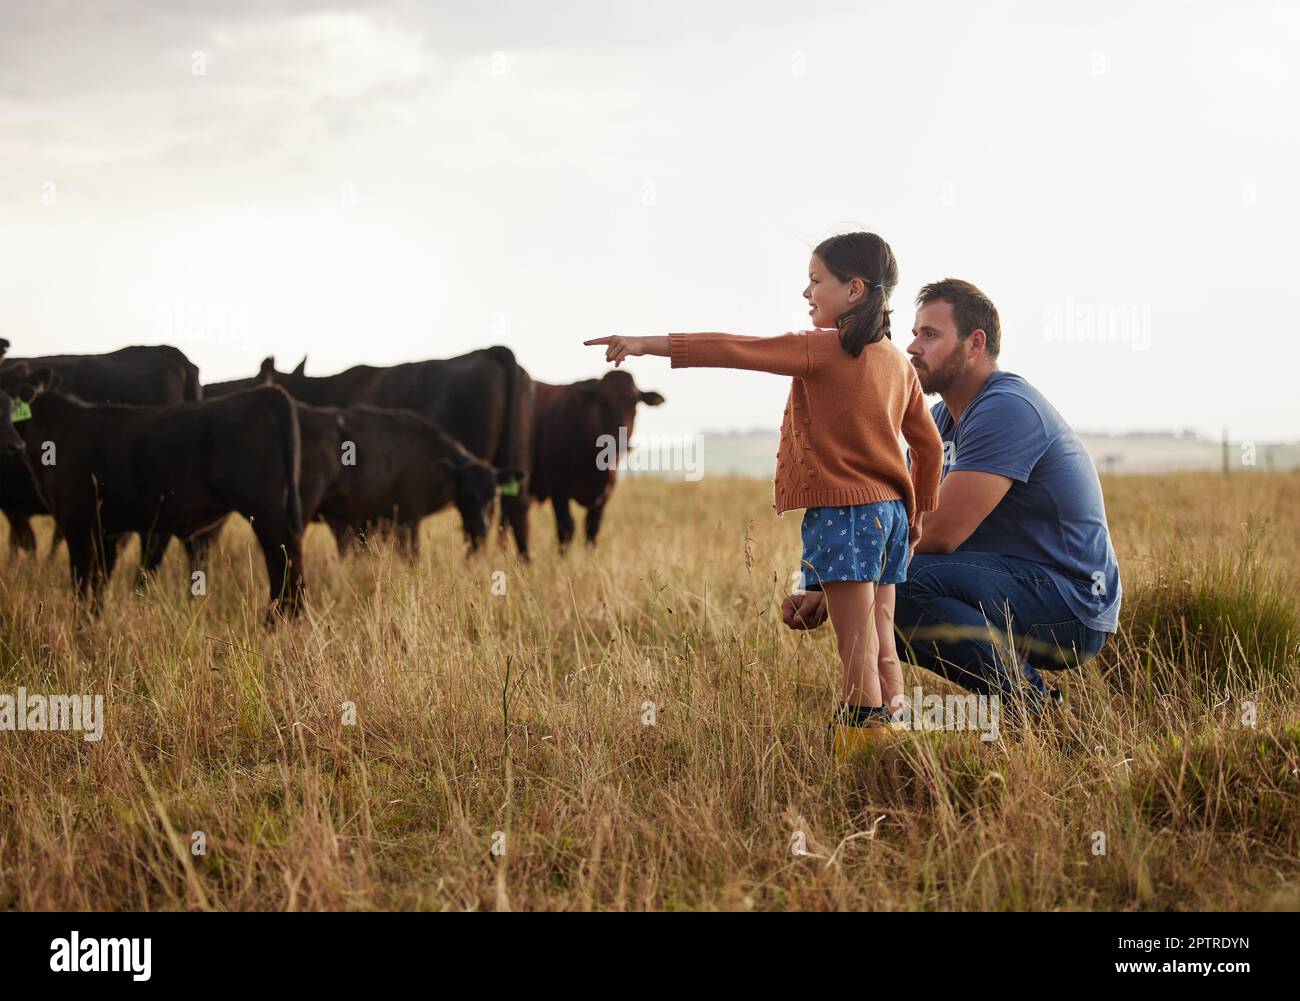 Family, dairy farming and farmer with child, daughter and girl pointing, showing and watching cows or cattle. Father and curious kid bonding on farm e Stock Photo